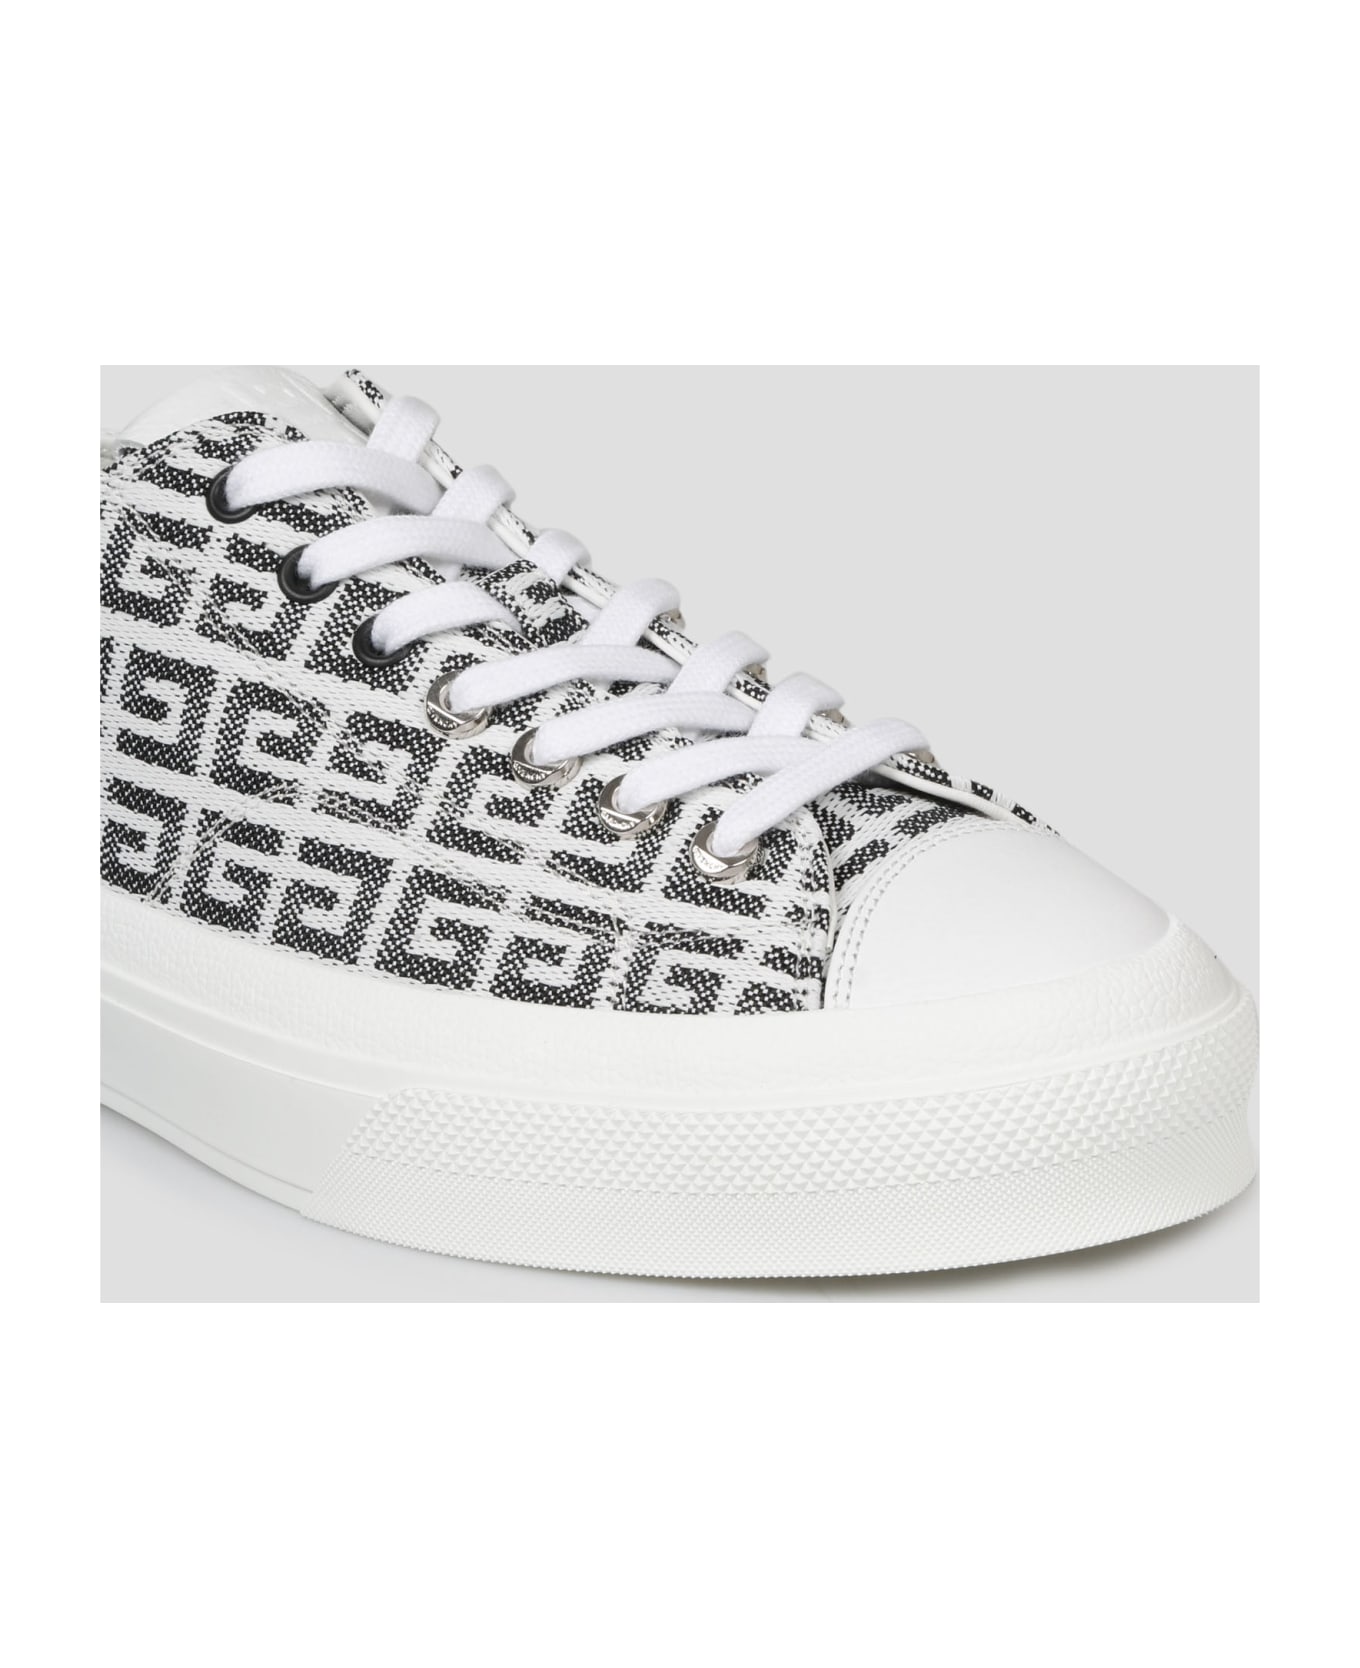 Givenchy City Low Jacquard Sneaker - Multicolour